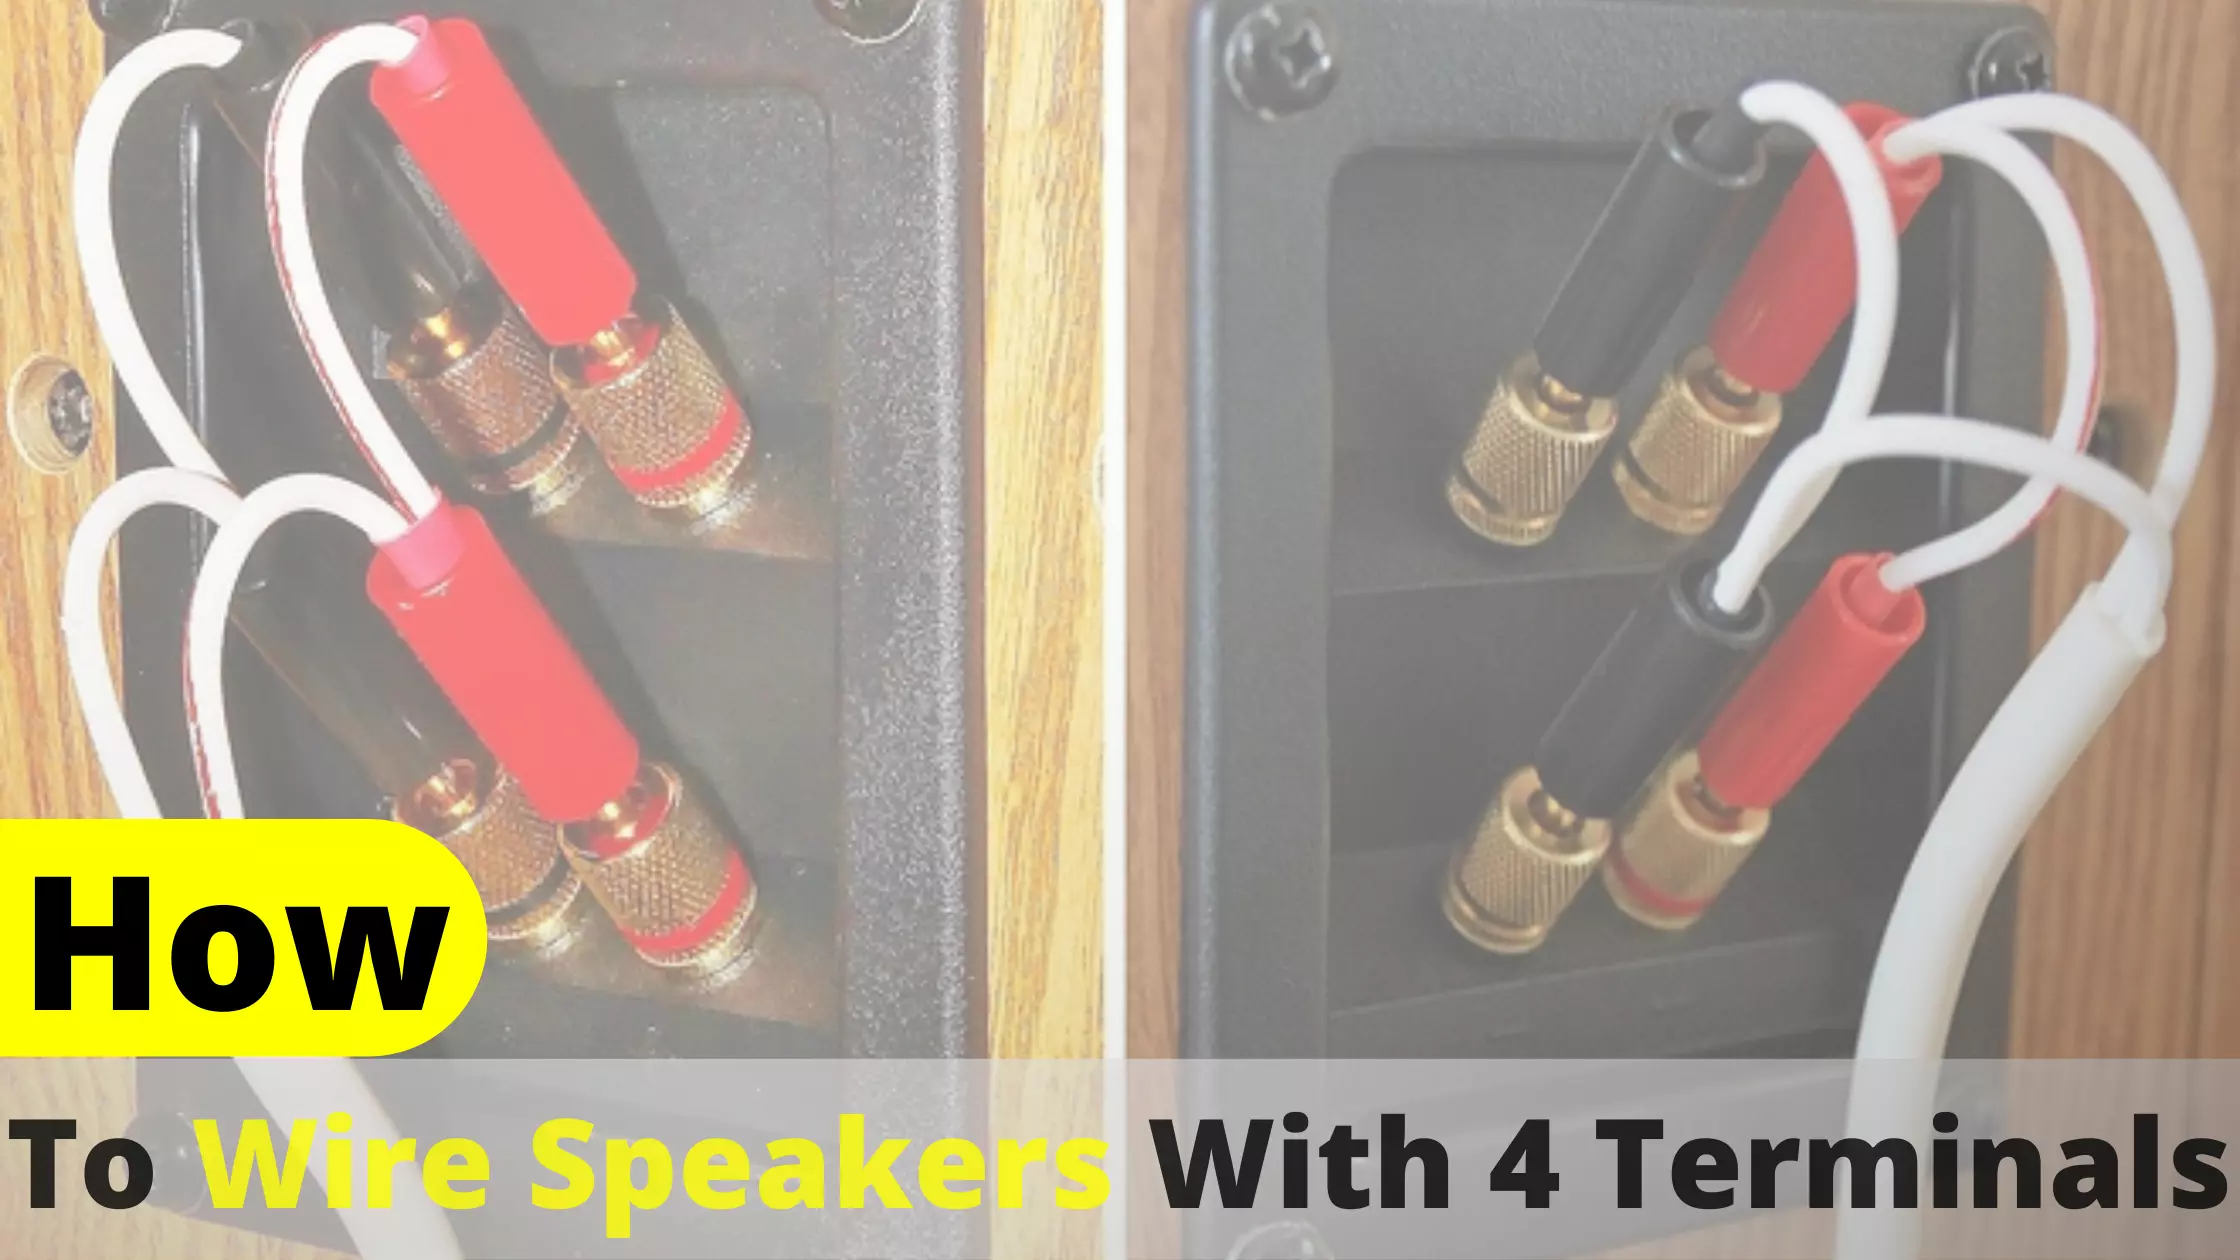 How to wire speakers with 4 terminals - Latest Guide 2022